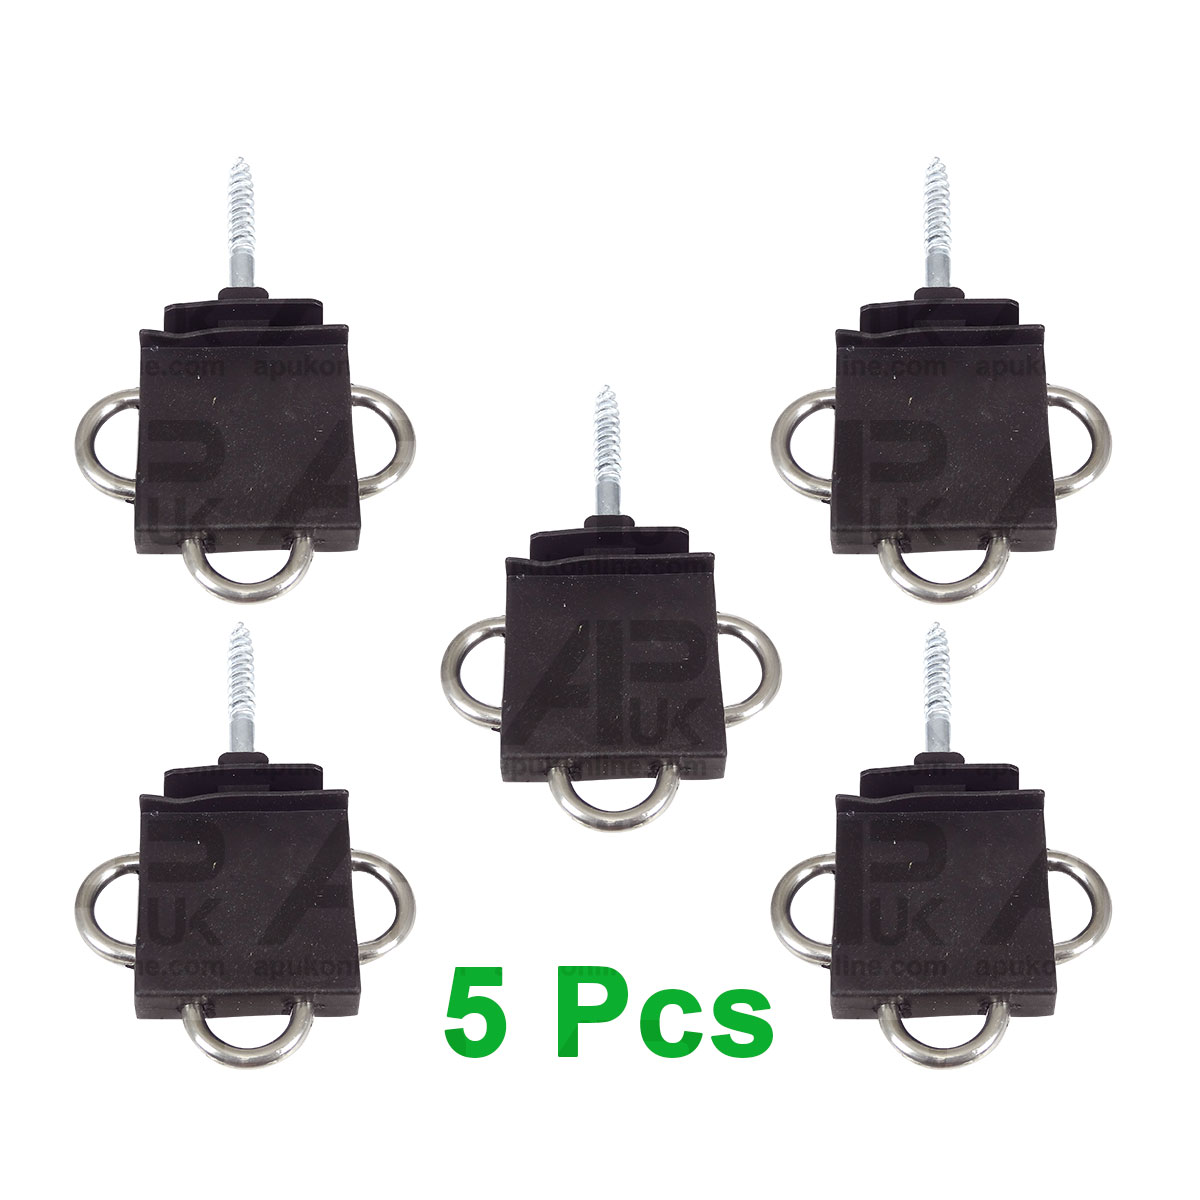 8x Three 3-Way Electric Fence Gate Handle Insulator Connection Connector